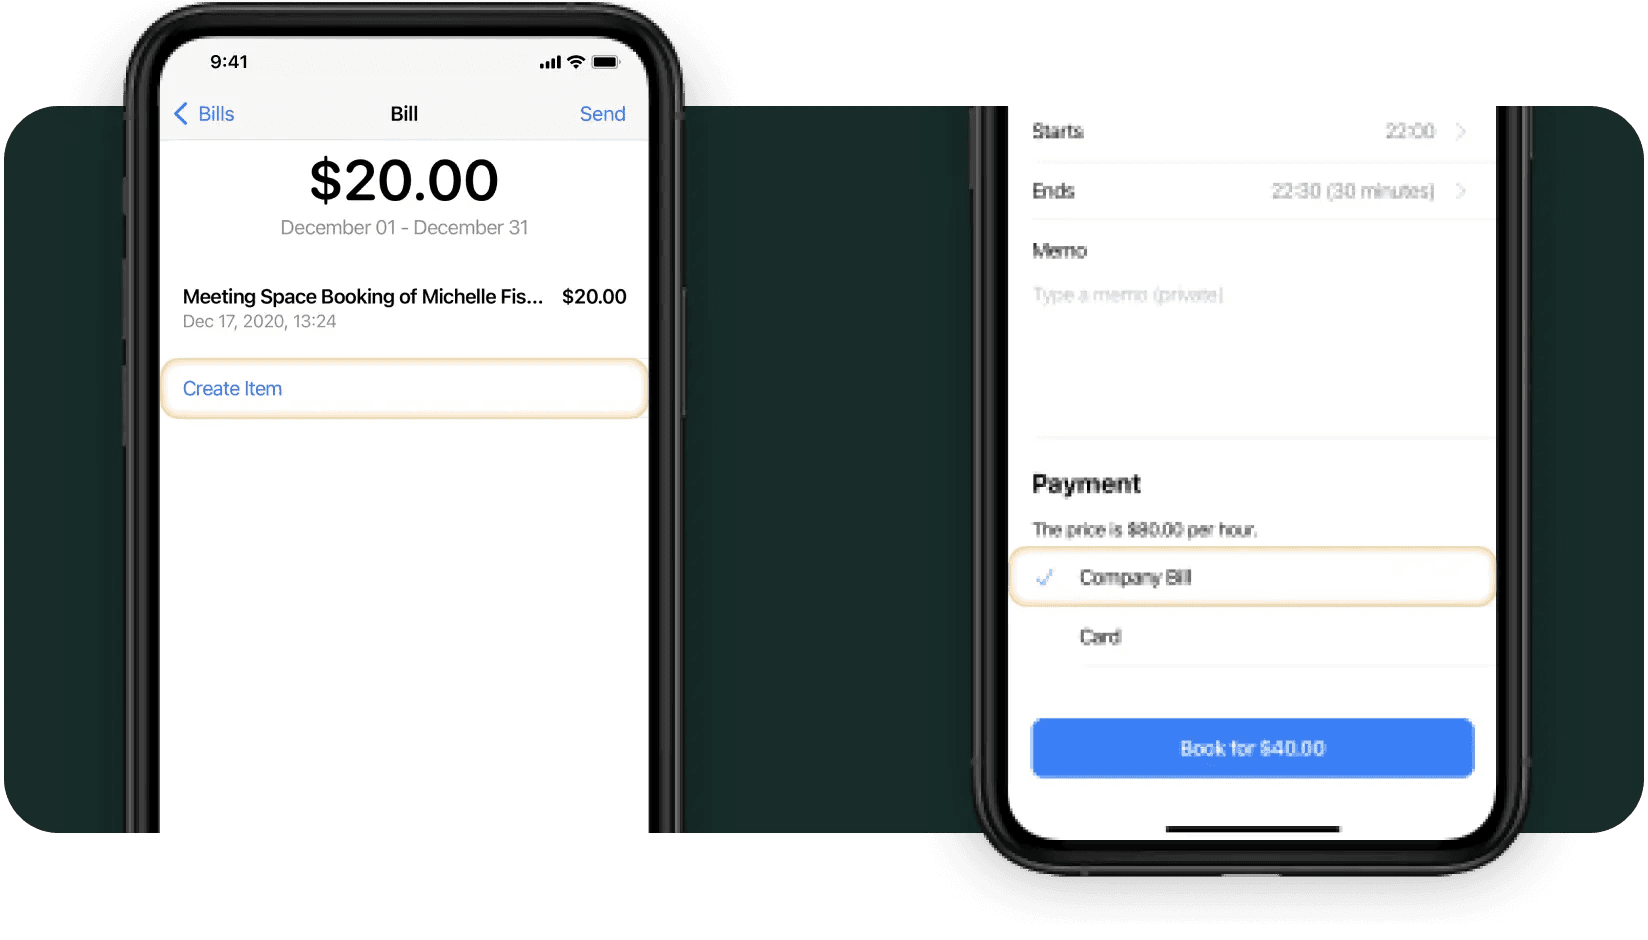 company invoice payment method - Spacebring billing system for coworking spaces